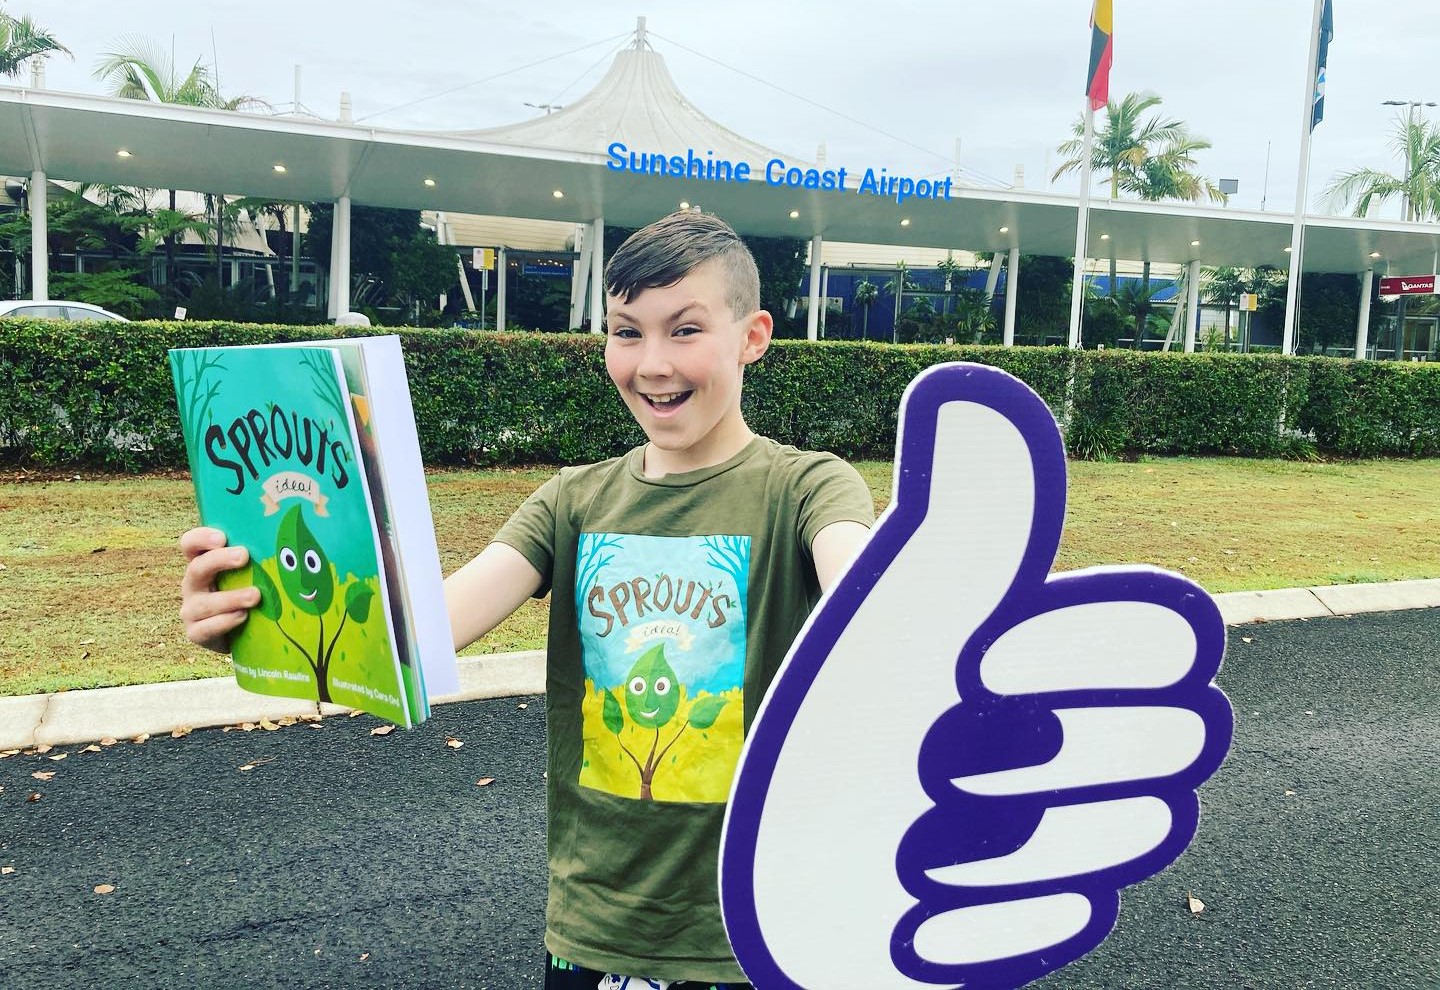 Young author set to steal show on inaugural Darwin flight